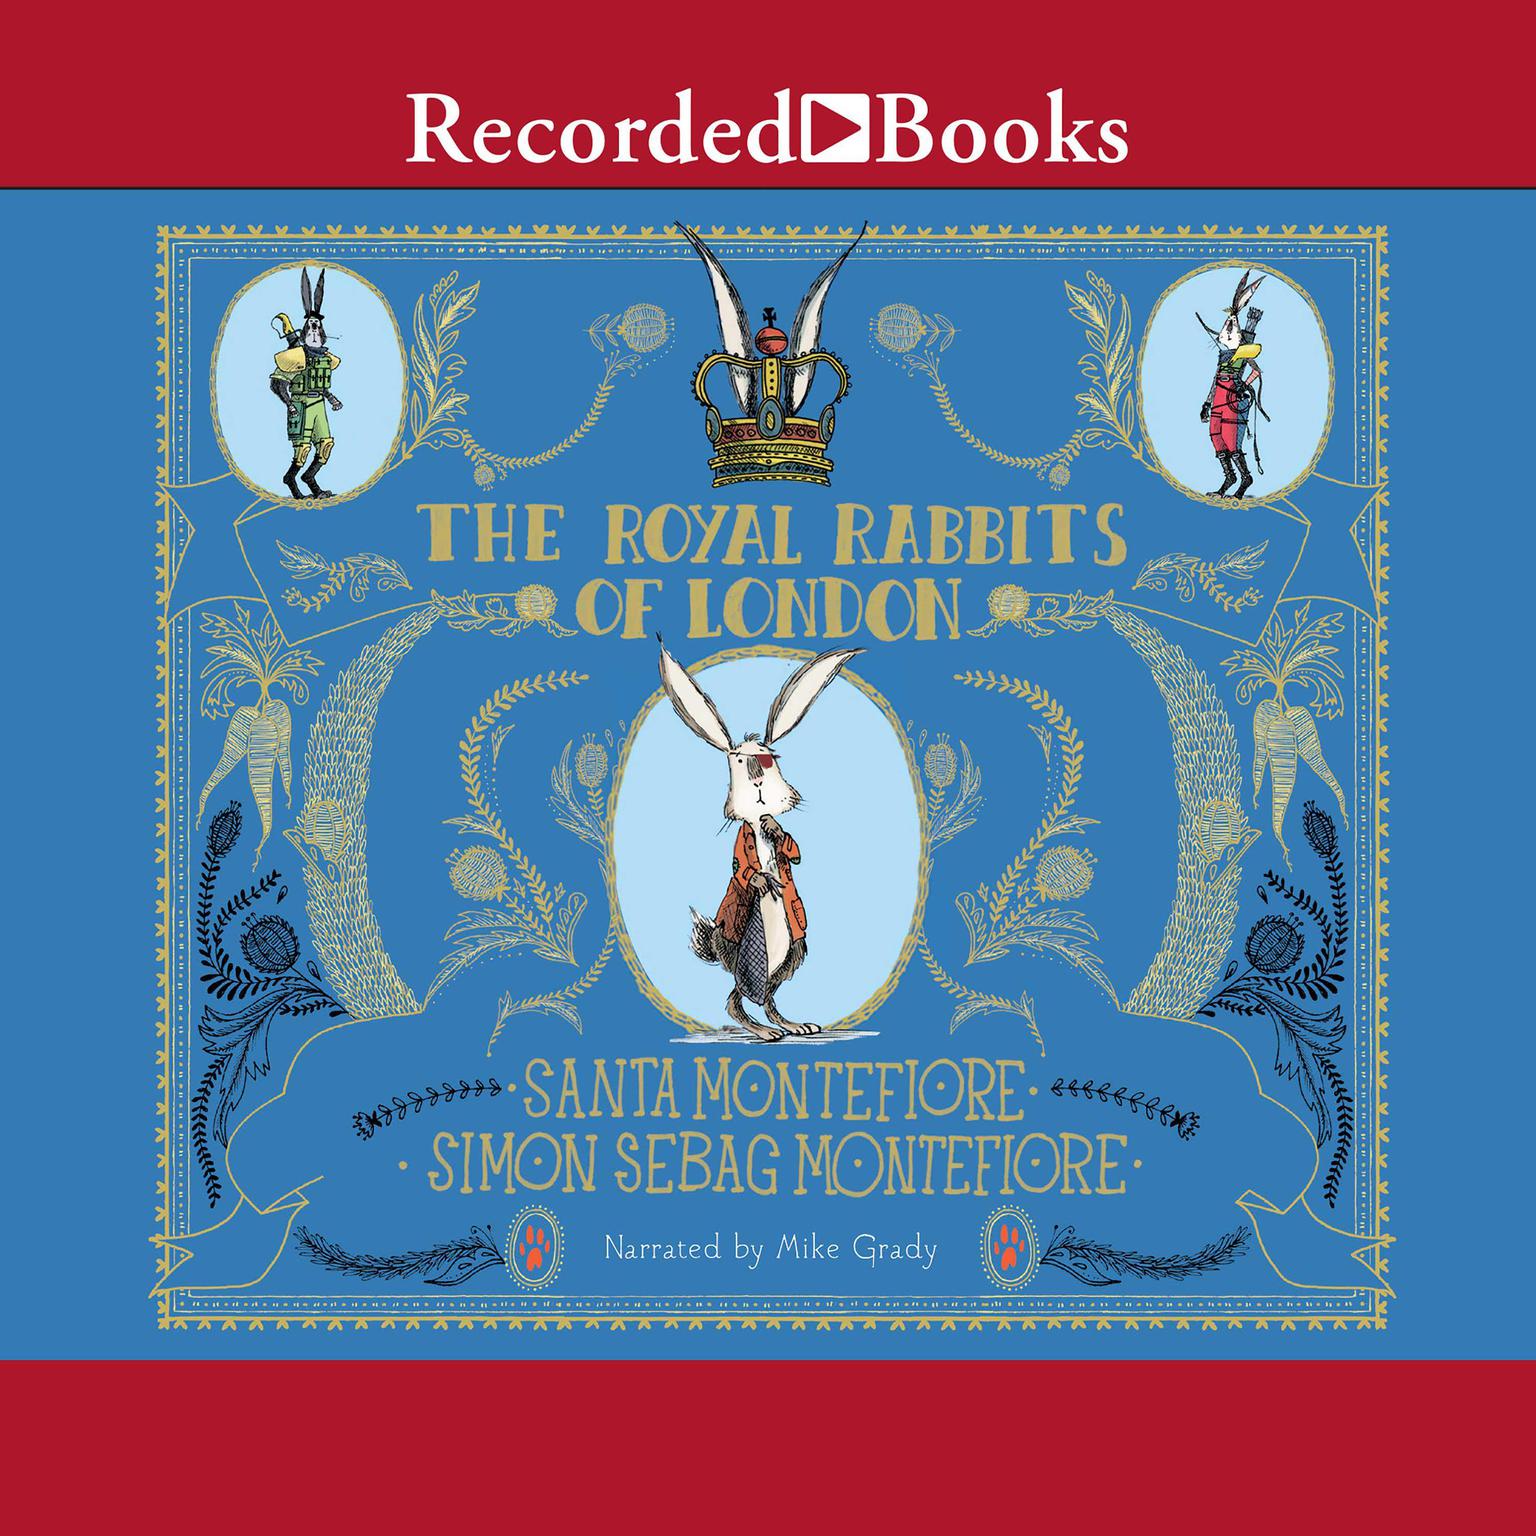 The Royal Rabbits of London: Escape From the Tower Audiobook, by Santa Montefiore